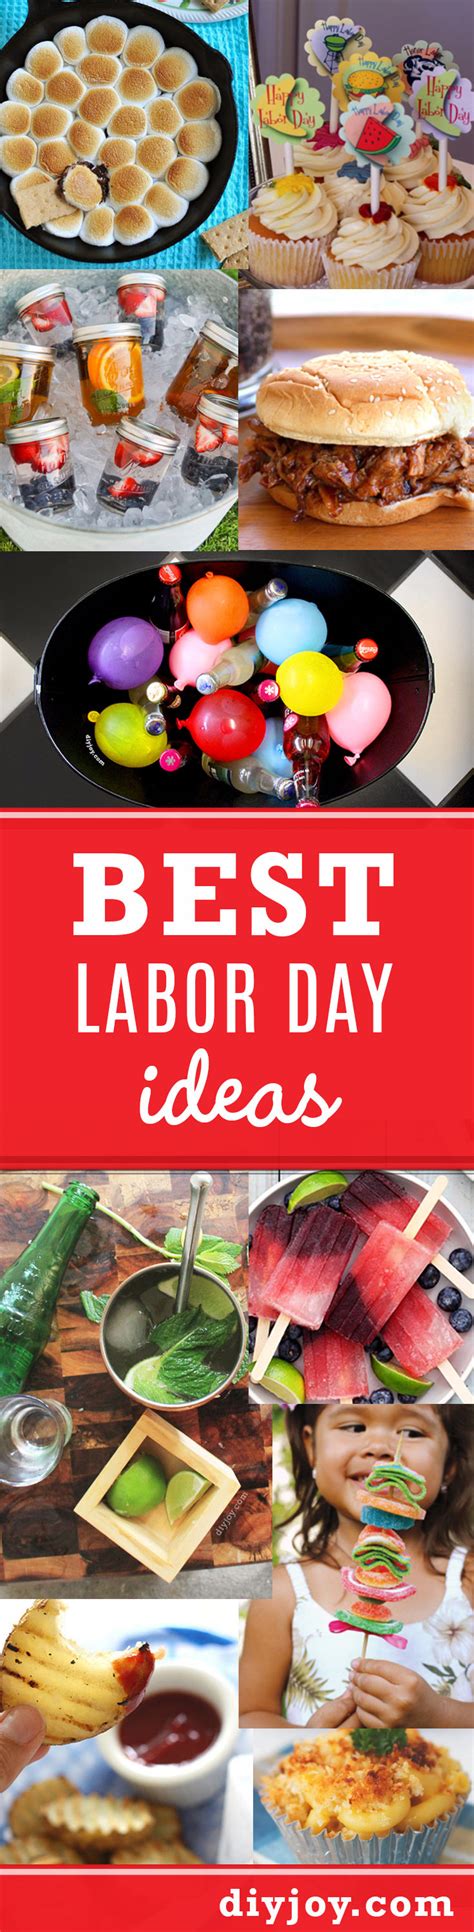 Joyseas patriotic fan decorations set is specially designed with classic red, white and blue color which can show your patriotic spirit and faith not only. Quick & Easy DIY Ideas to Make Your Labor Day Celebration Special